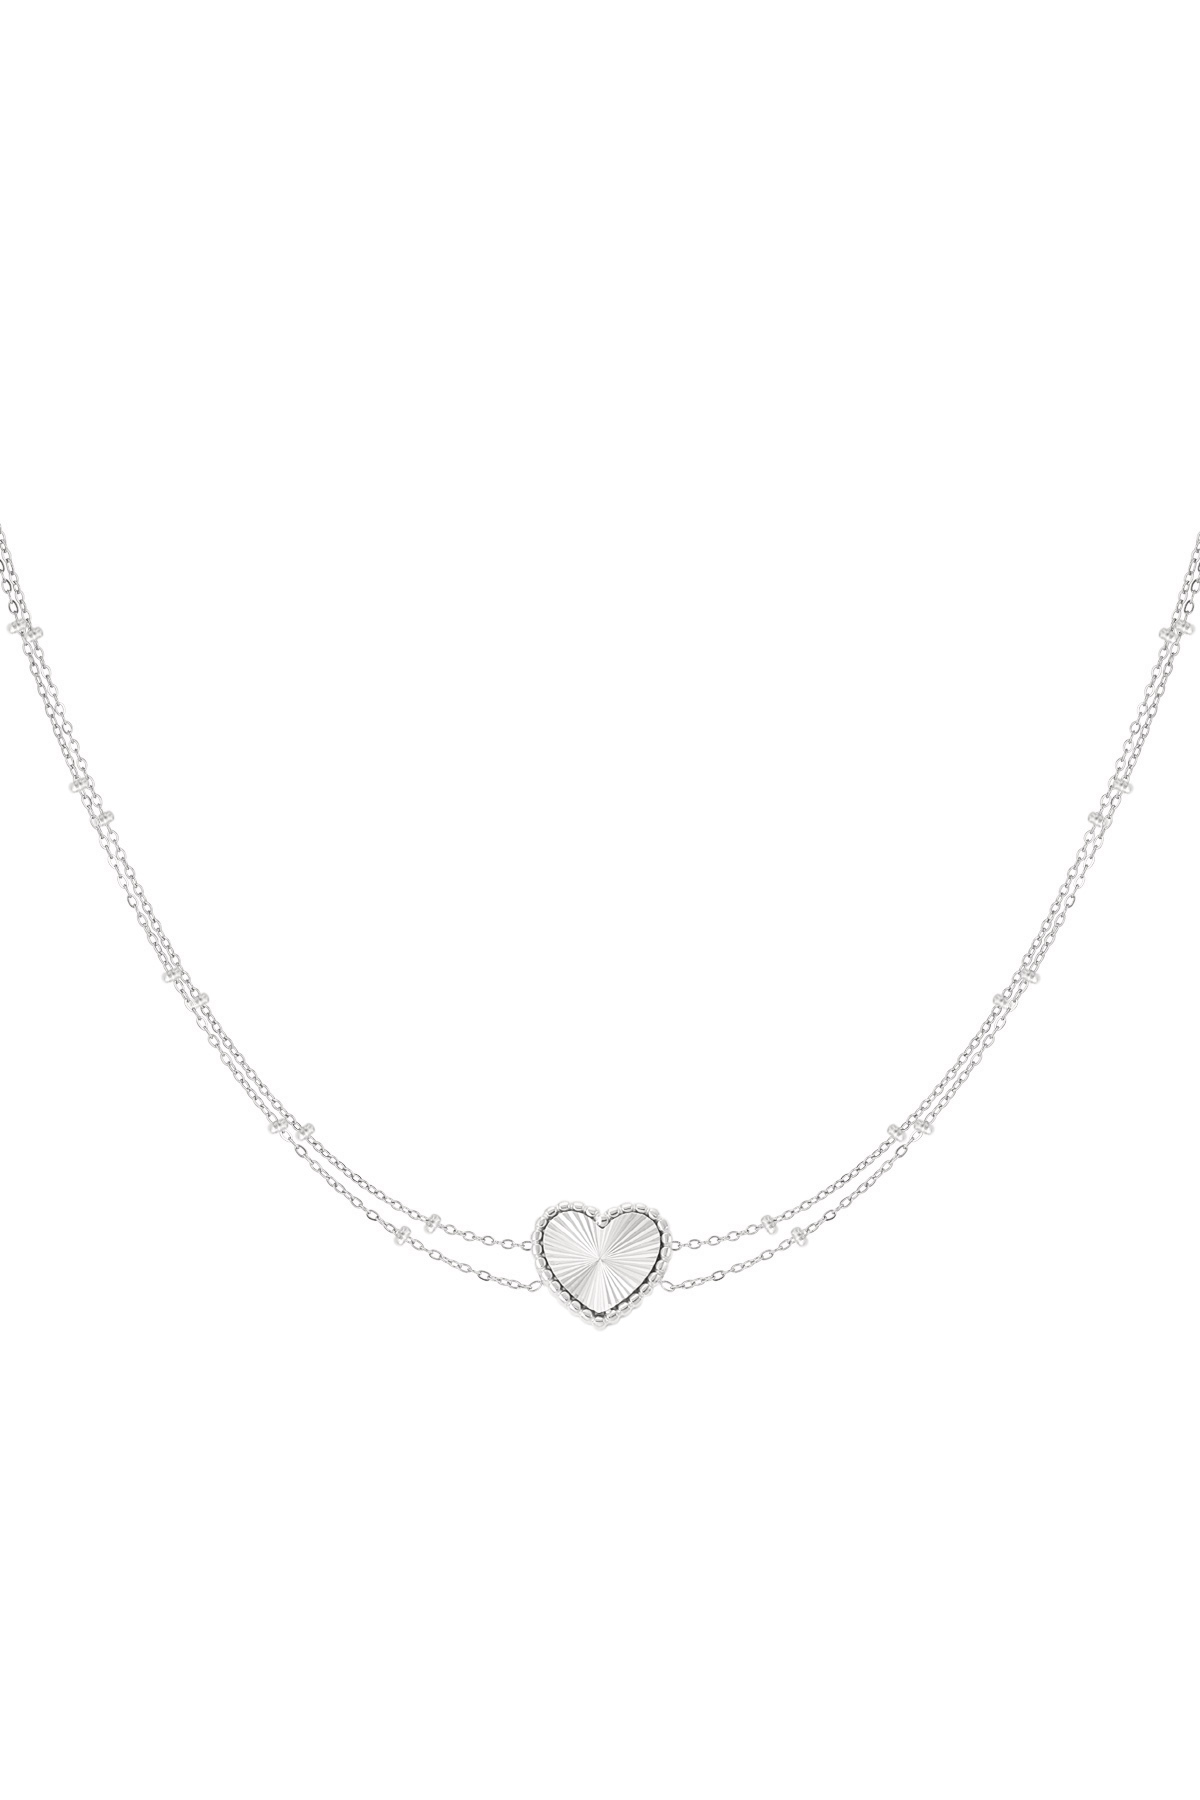 Necklace heart with balls - silver